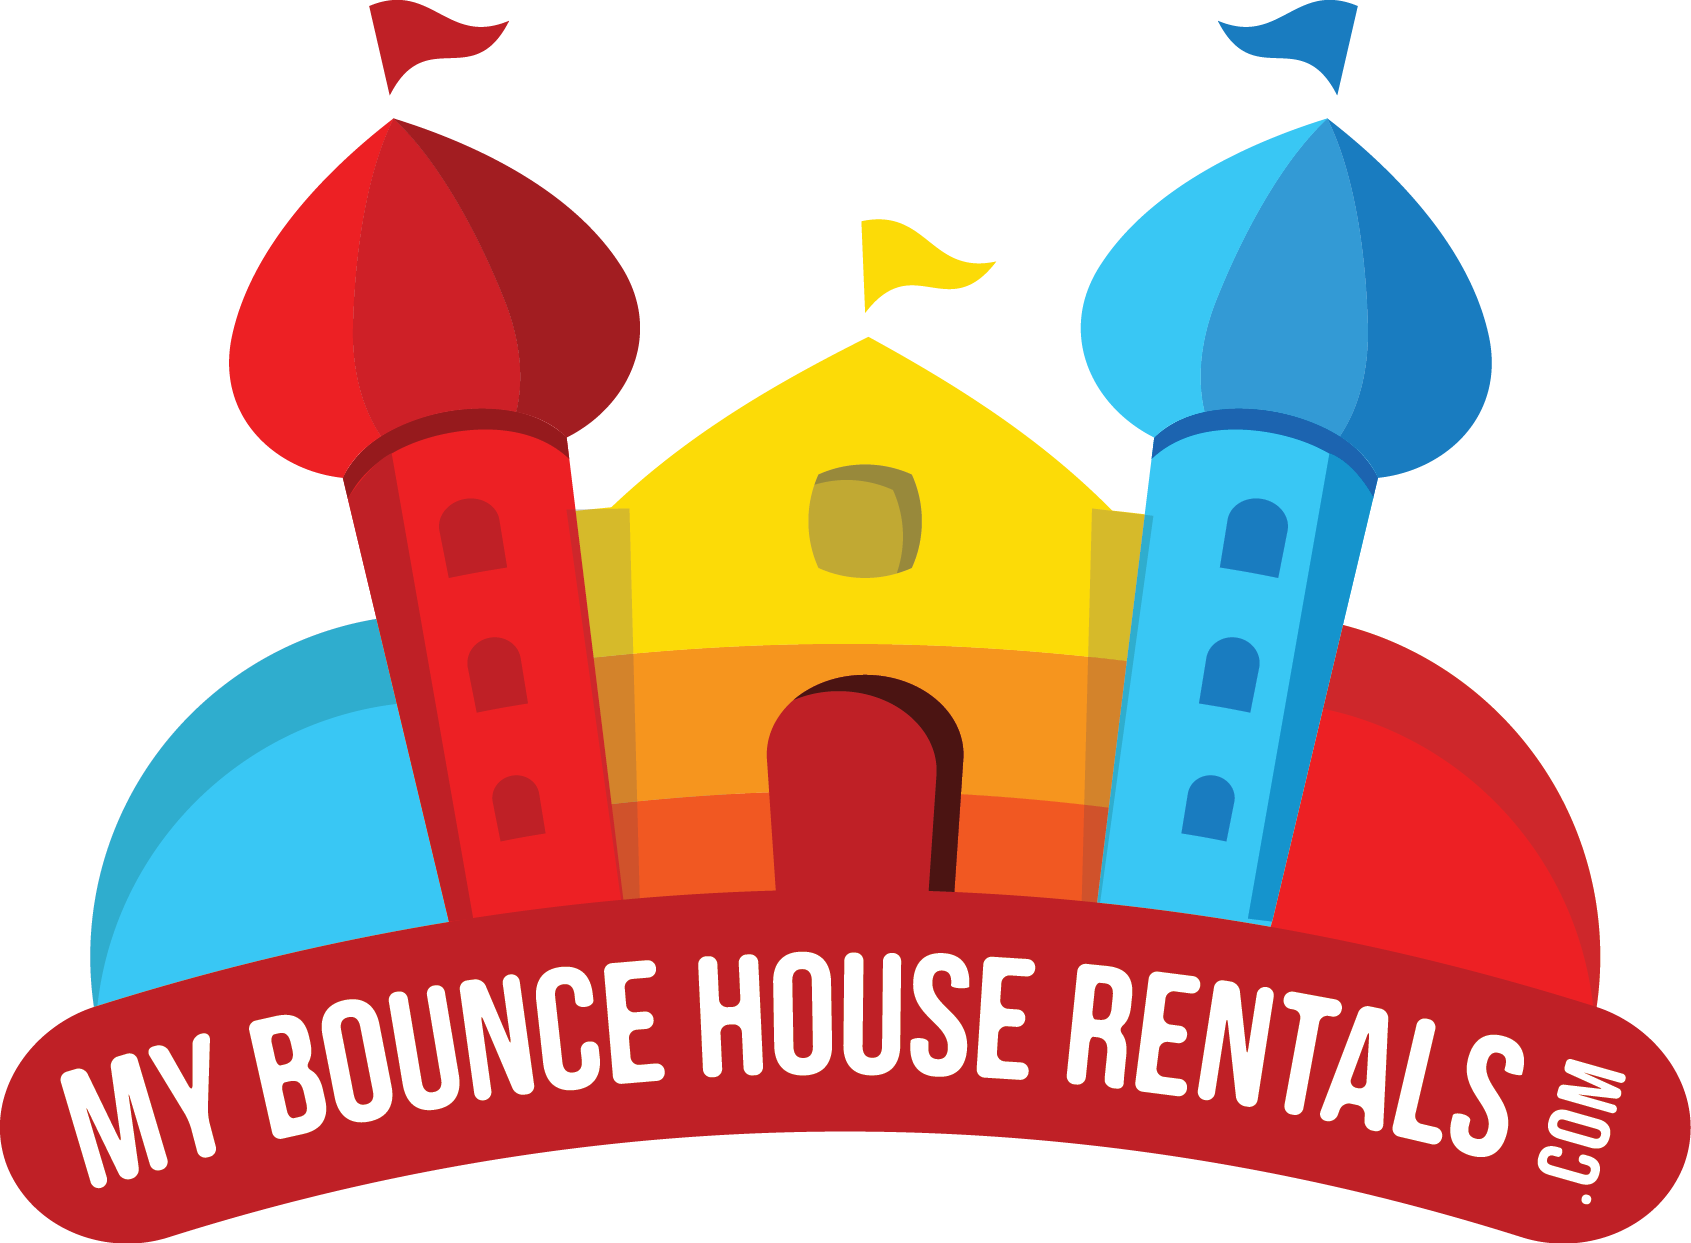 My bounce house rentals of Springfield's Logo